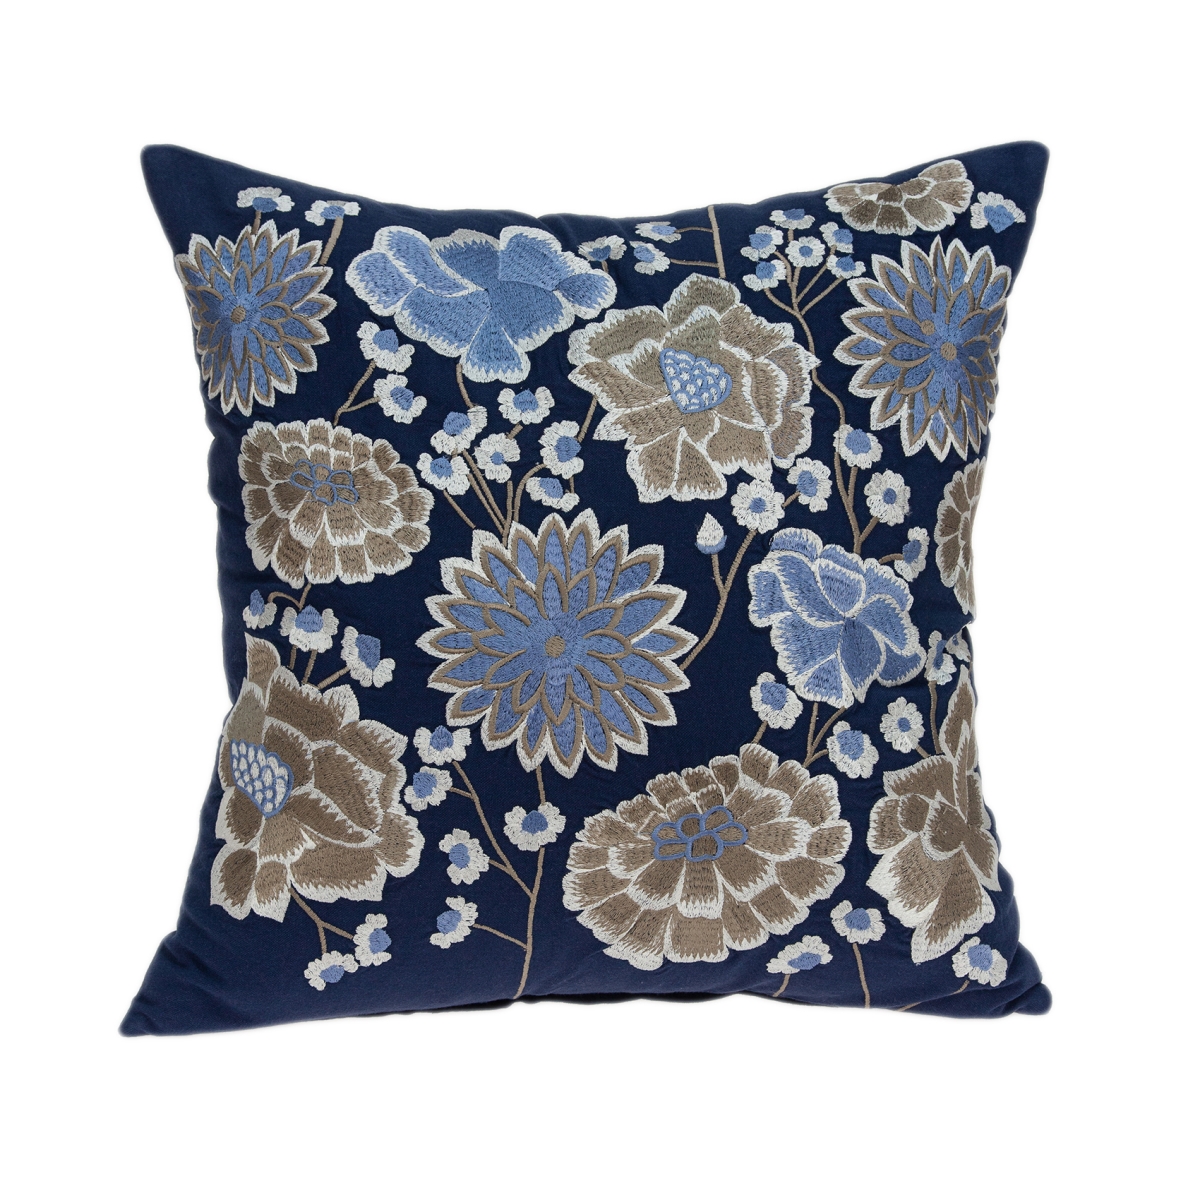 Pild11121c Dona Blue, White & Tan Square Traditional Pillow Cover - 20 X 20 X 0.5 In.